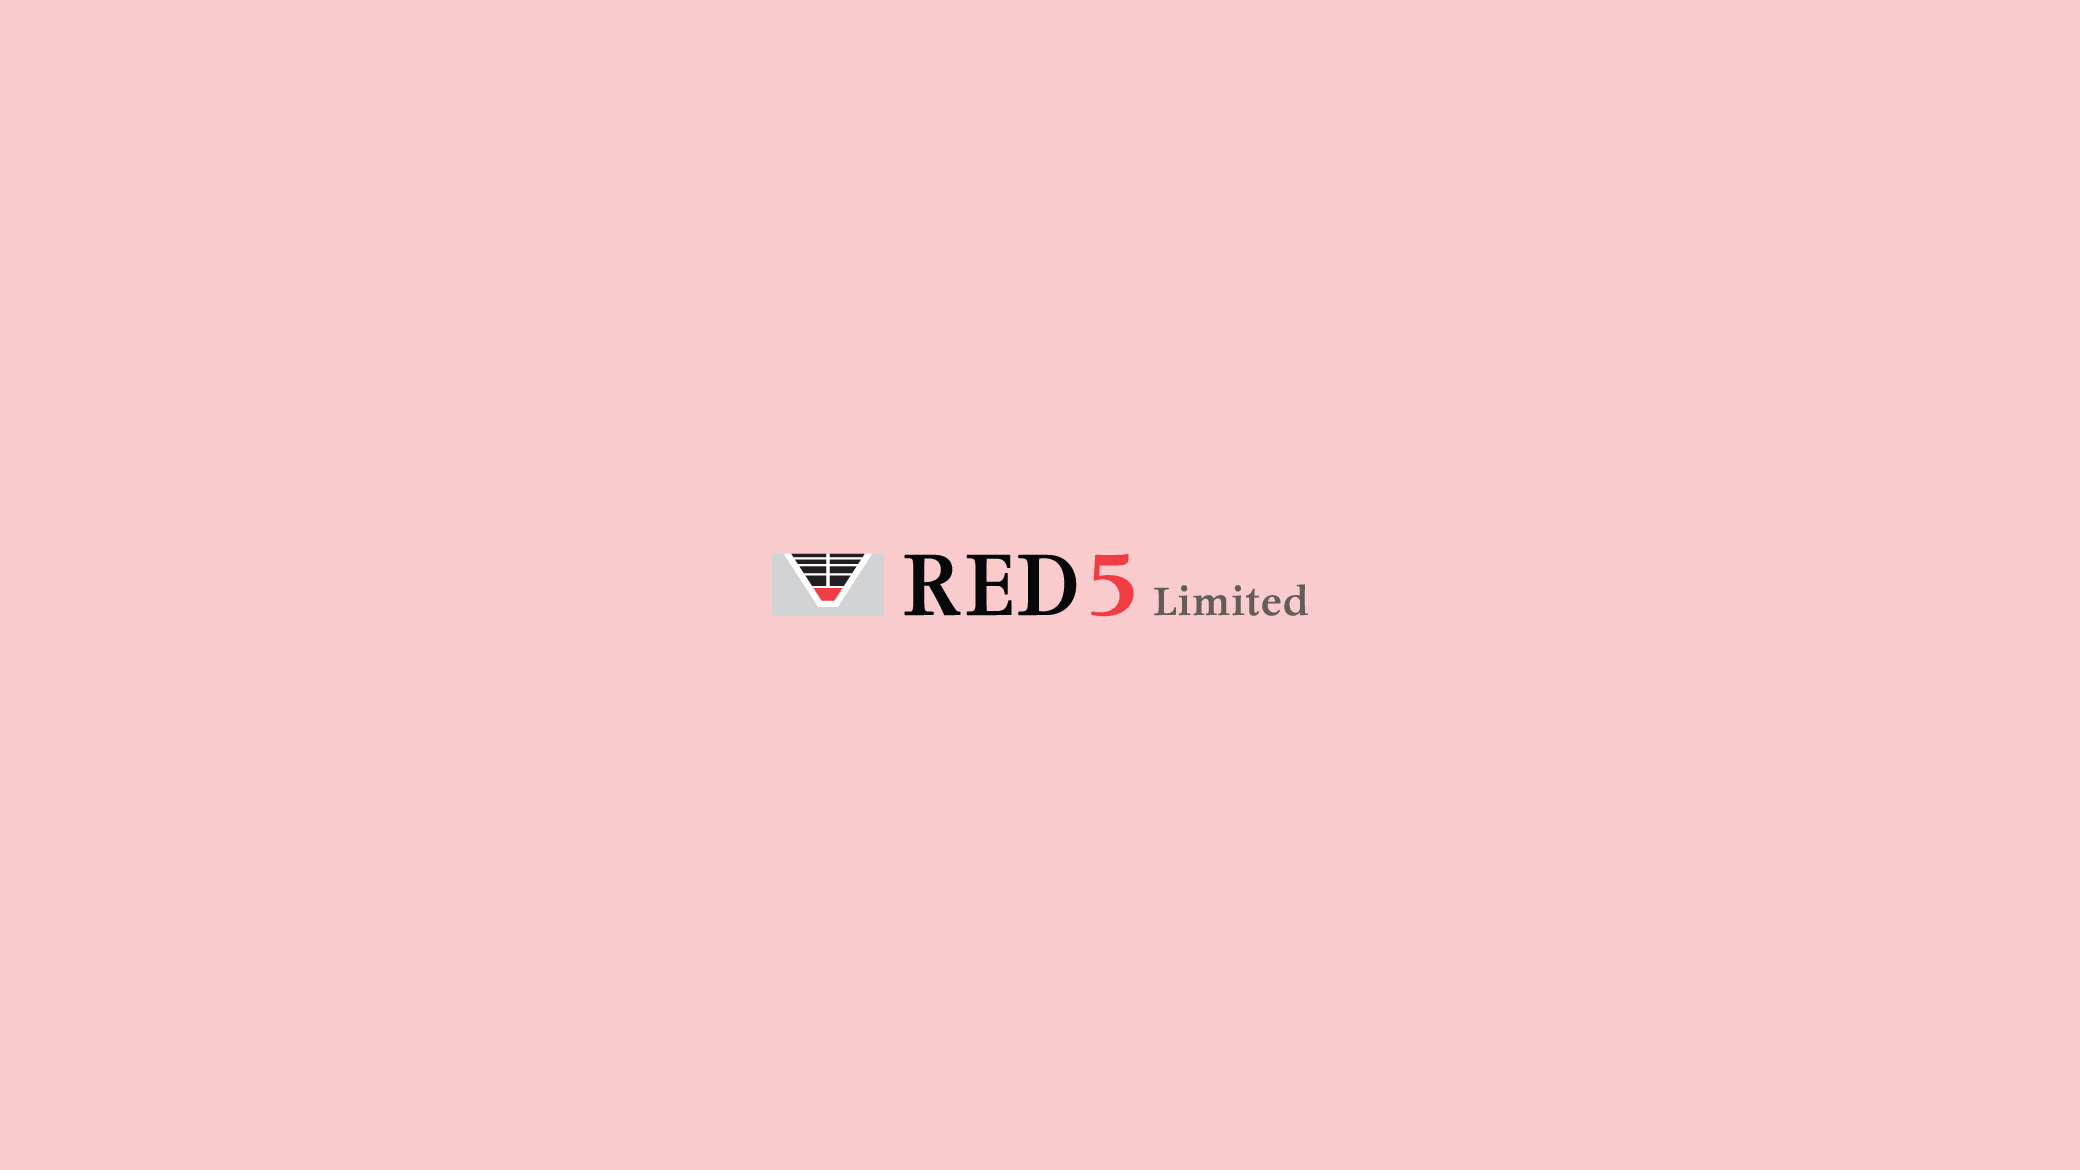 RED 5 Limited